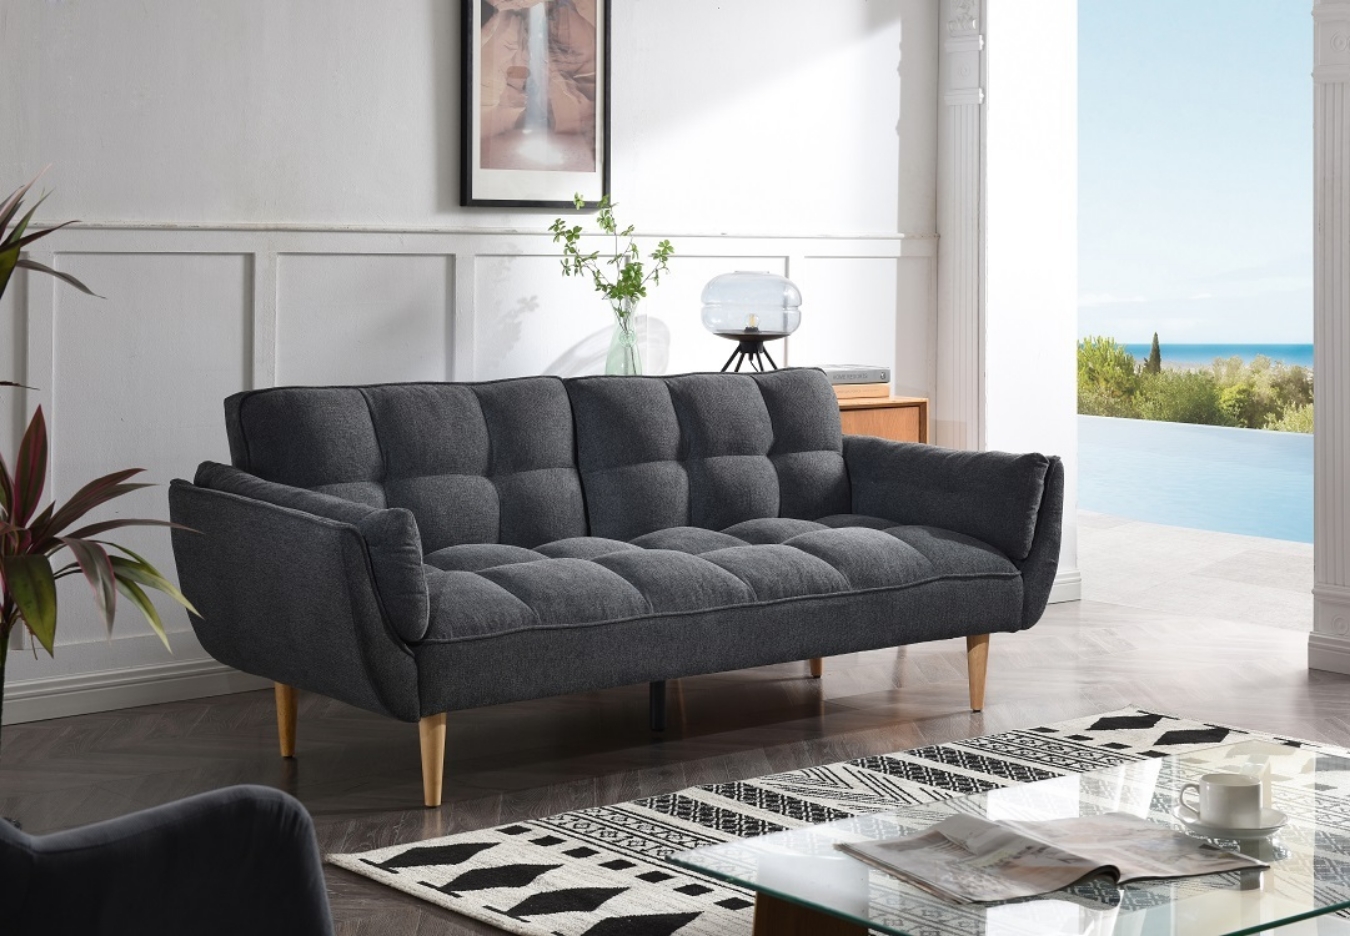 You can’t help but sit back and relax with Jessie Sofa Bed a laid-back design which style oozes luxury with deep seat cushions and feather filled back cushions. 